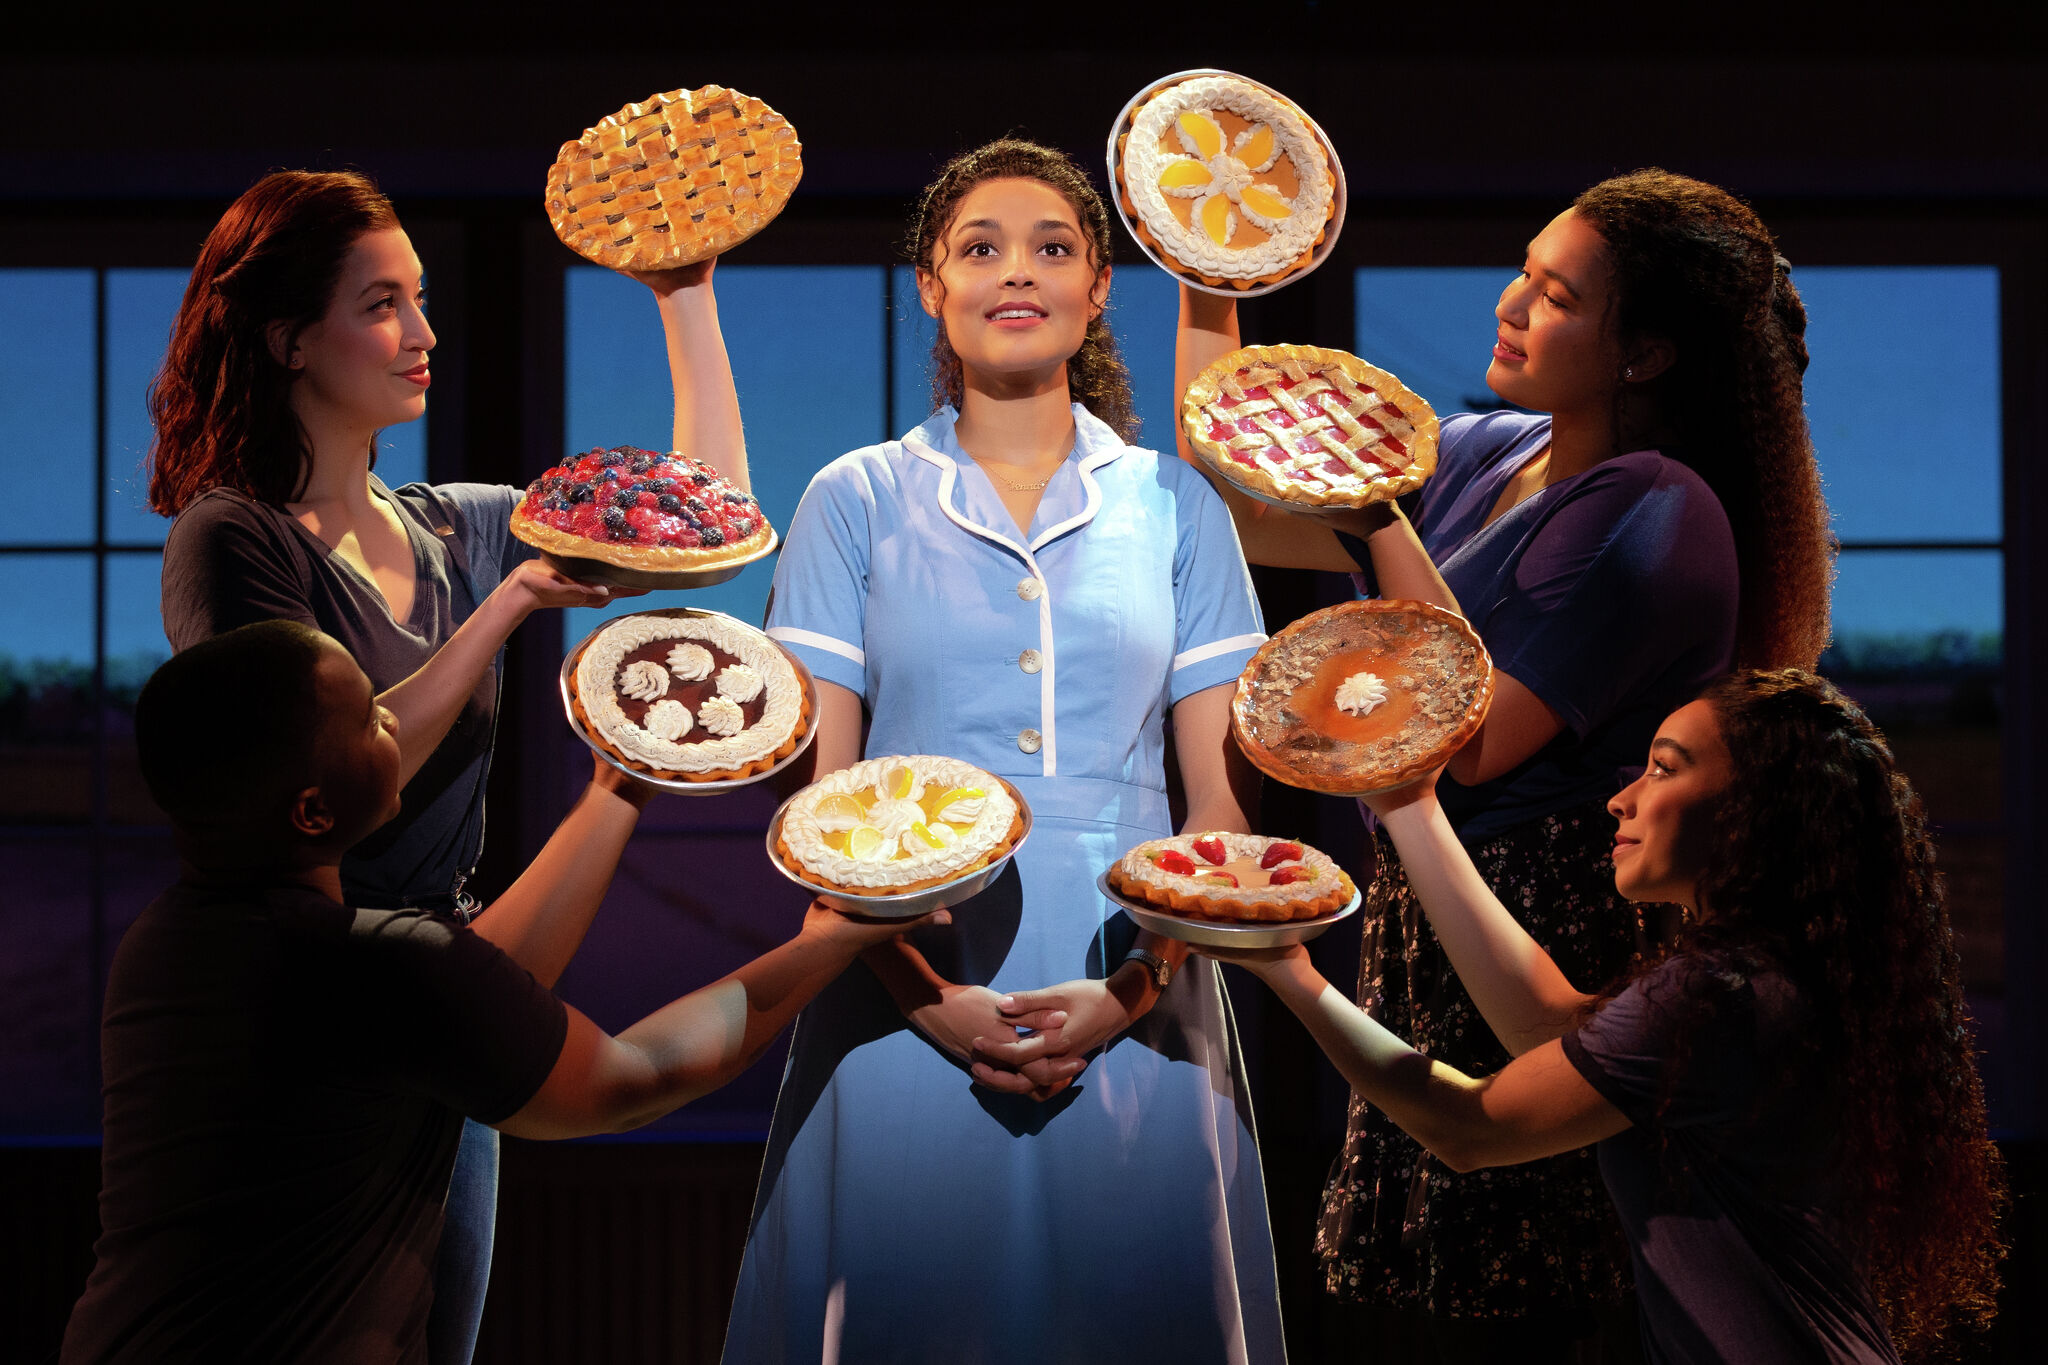 The Hilarious Hit Broadway Musical Waitress Coming To Midland